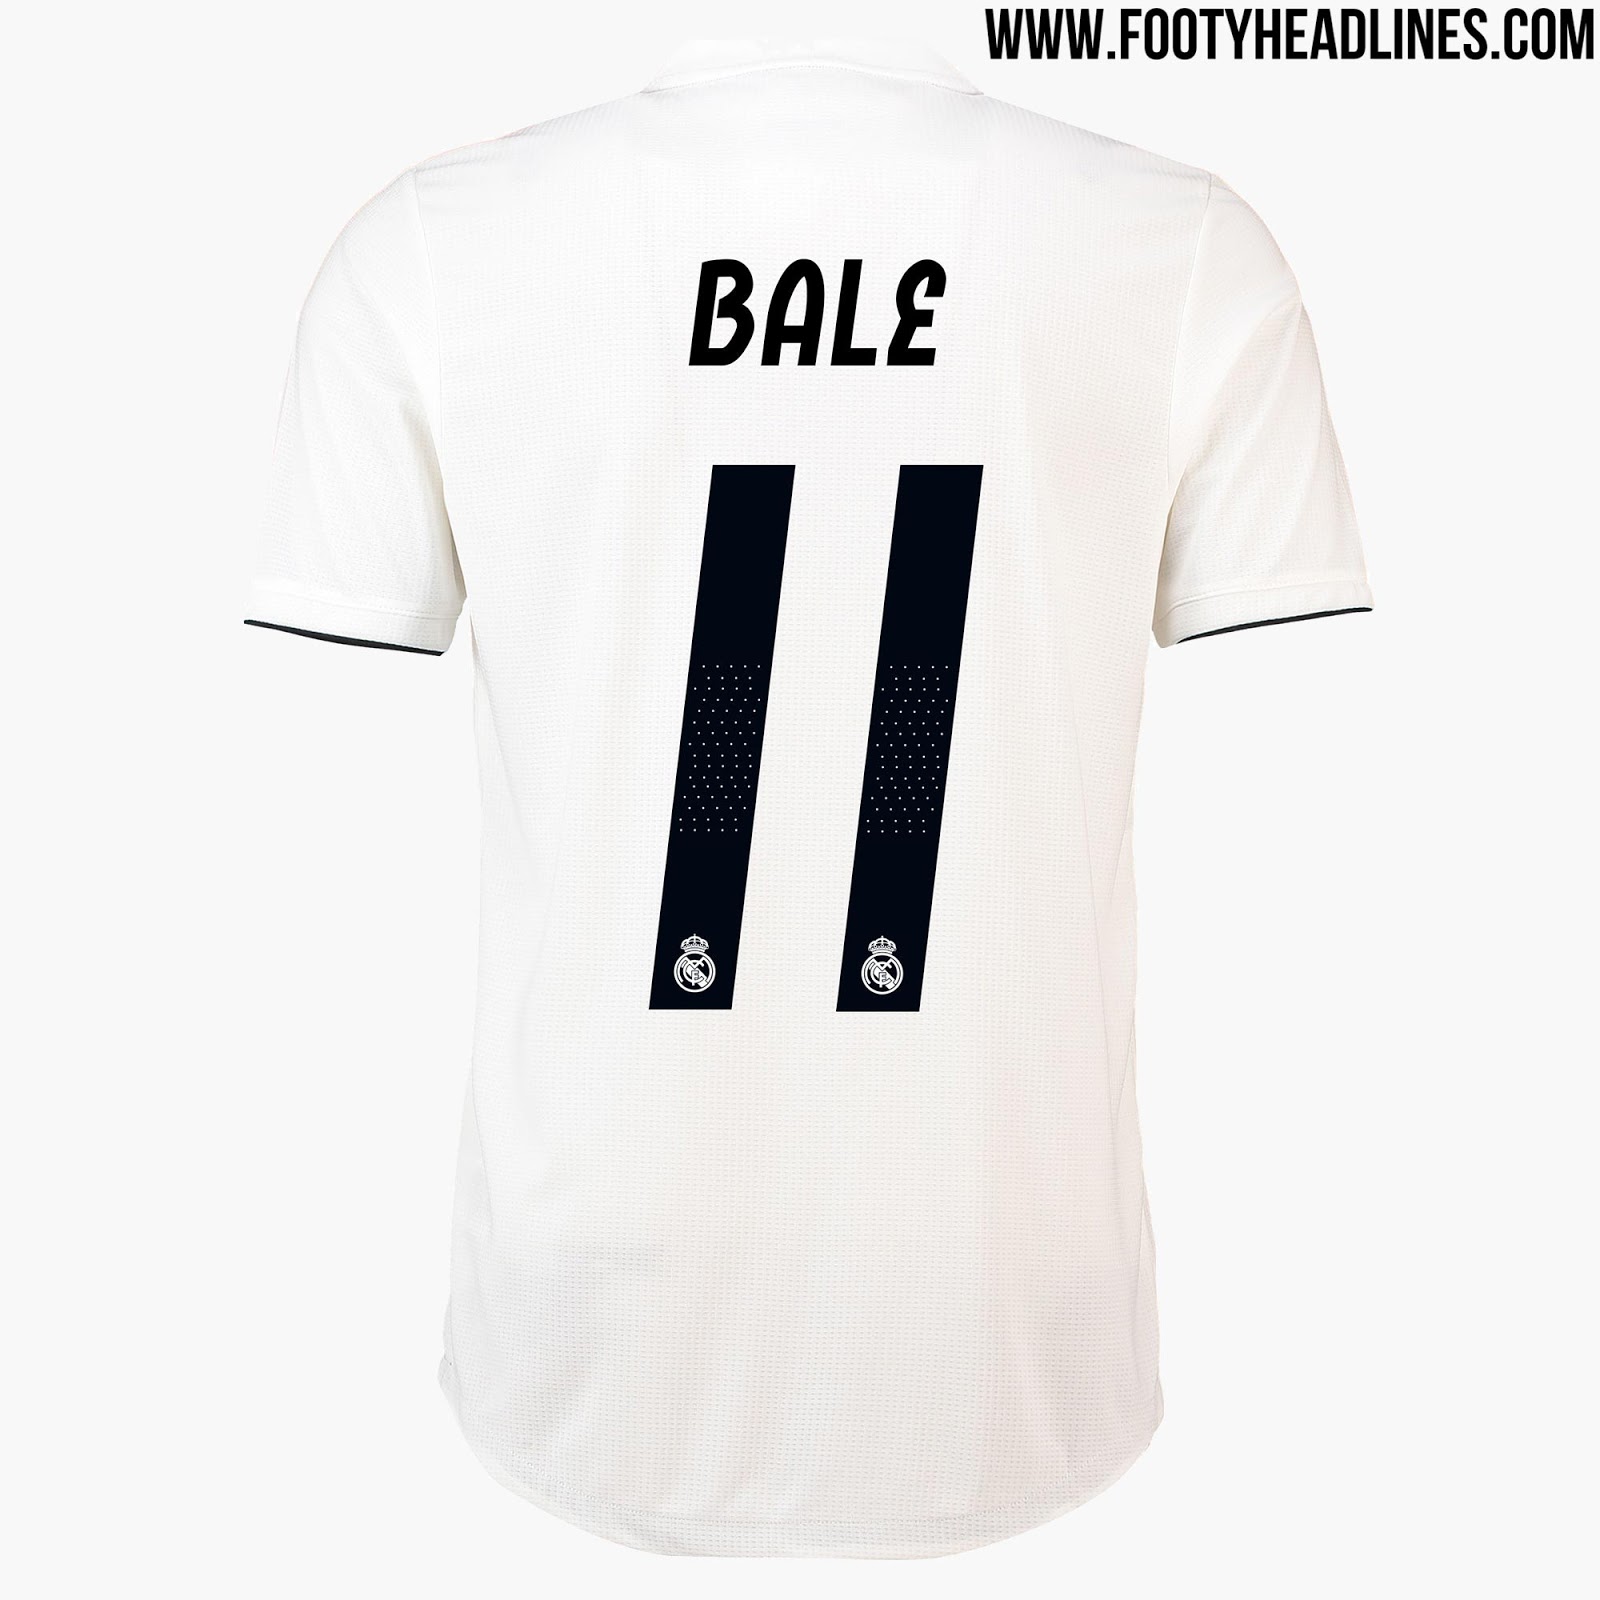 All-New Extraordinary Real Madrid 18-19 Kit Font Released - Footy Headlines